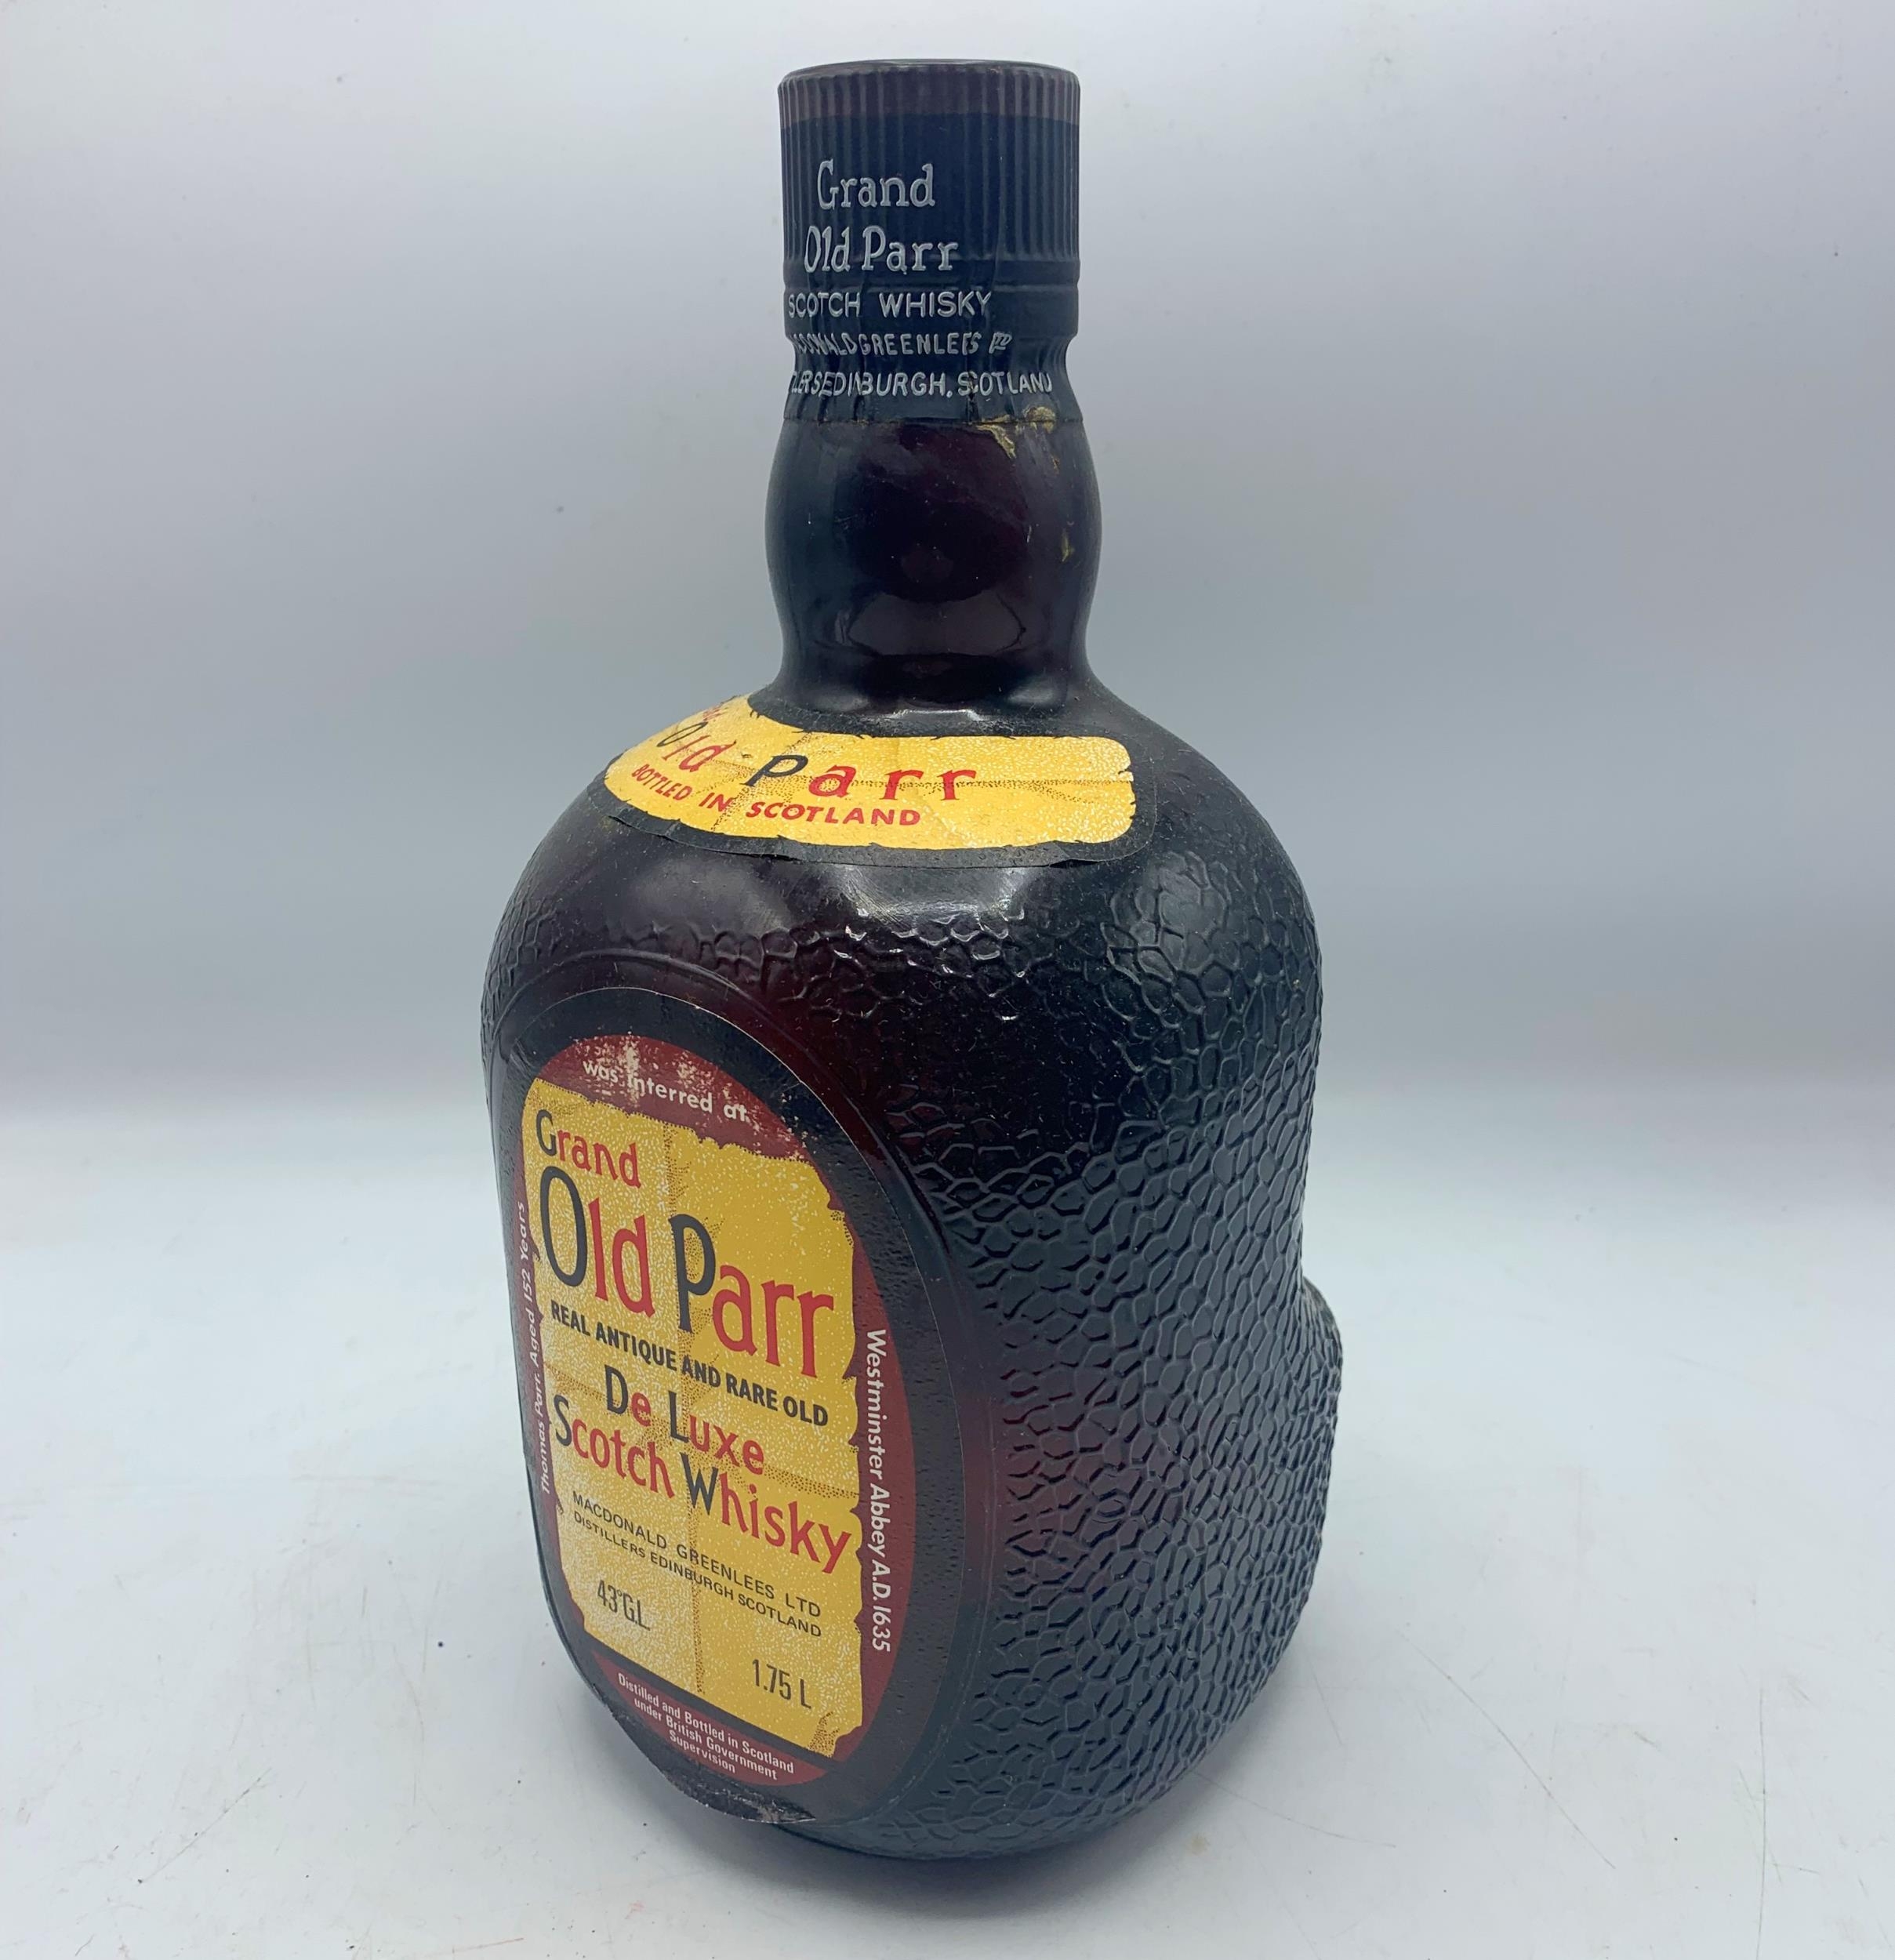 Boxed Grand Old Parr De Luxe Scotch Whisky. Unopened. - Image 2 of 4